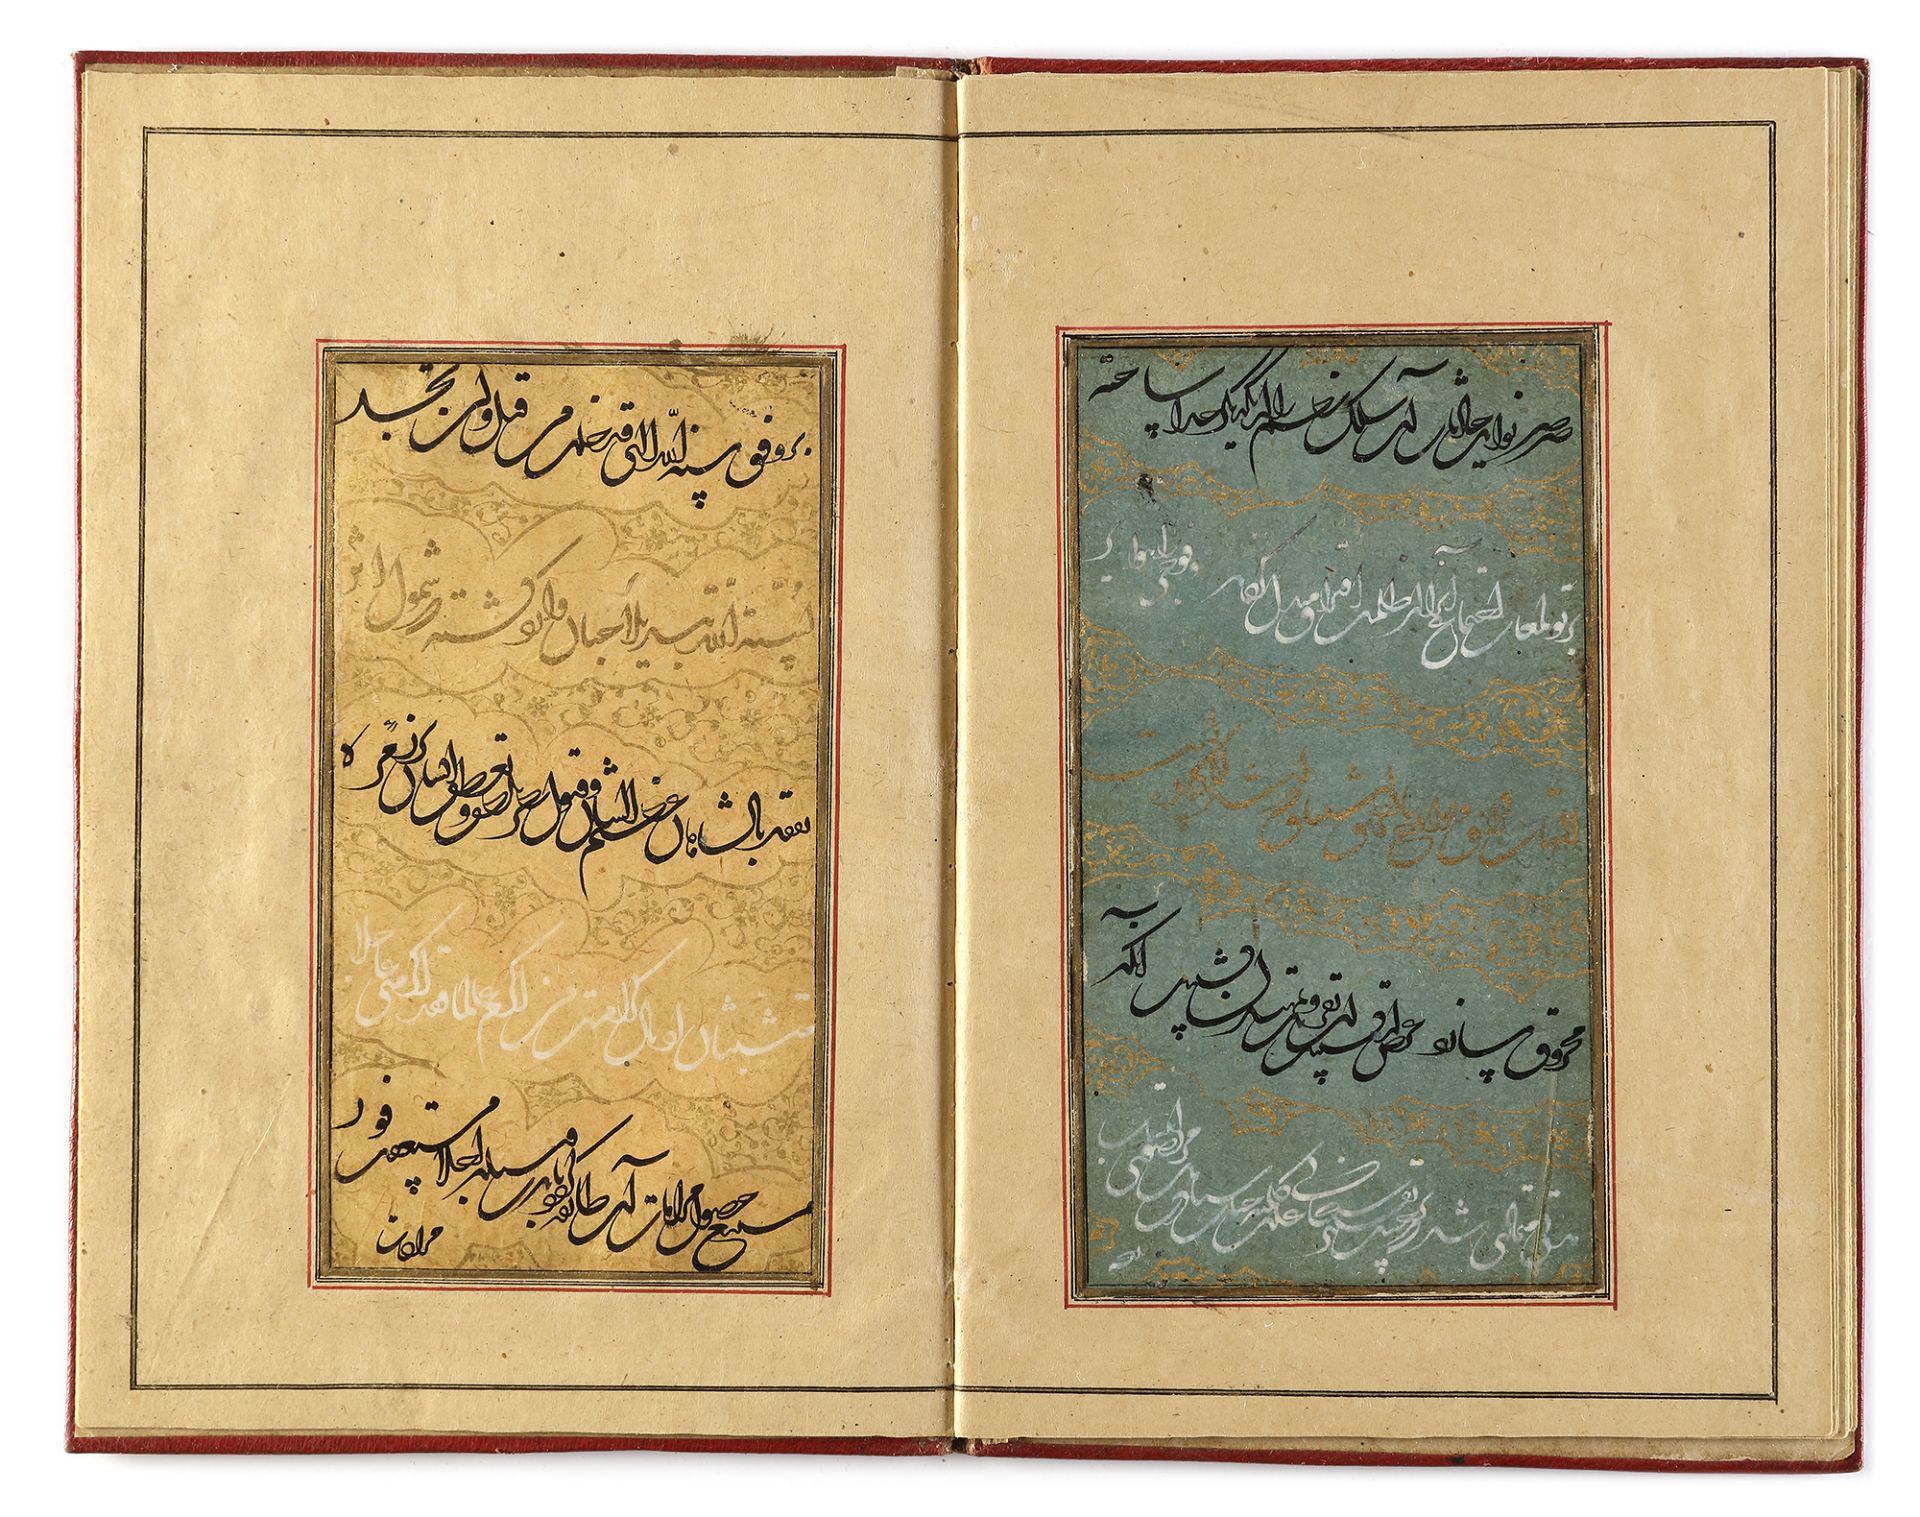 A MANUSCRIPT OF POETRY, SIGNED BY IKHTIYAR AL-MUNSHI, PERSIA, SAVAFID, DATED 975 AH/1567-68 AD - Image 10 of 18